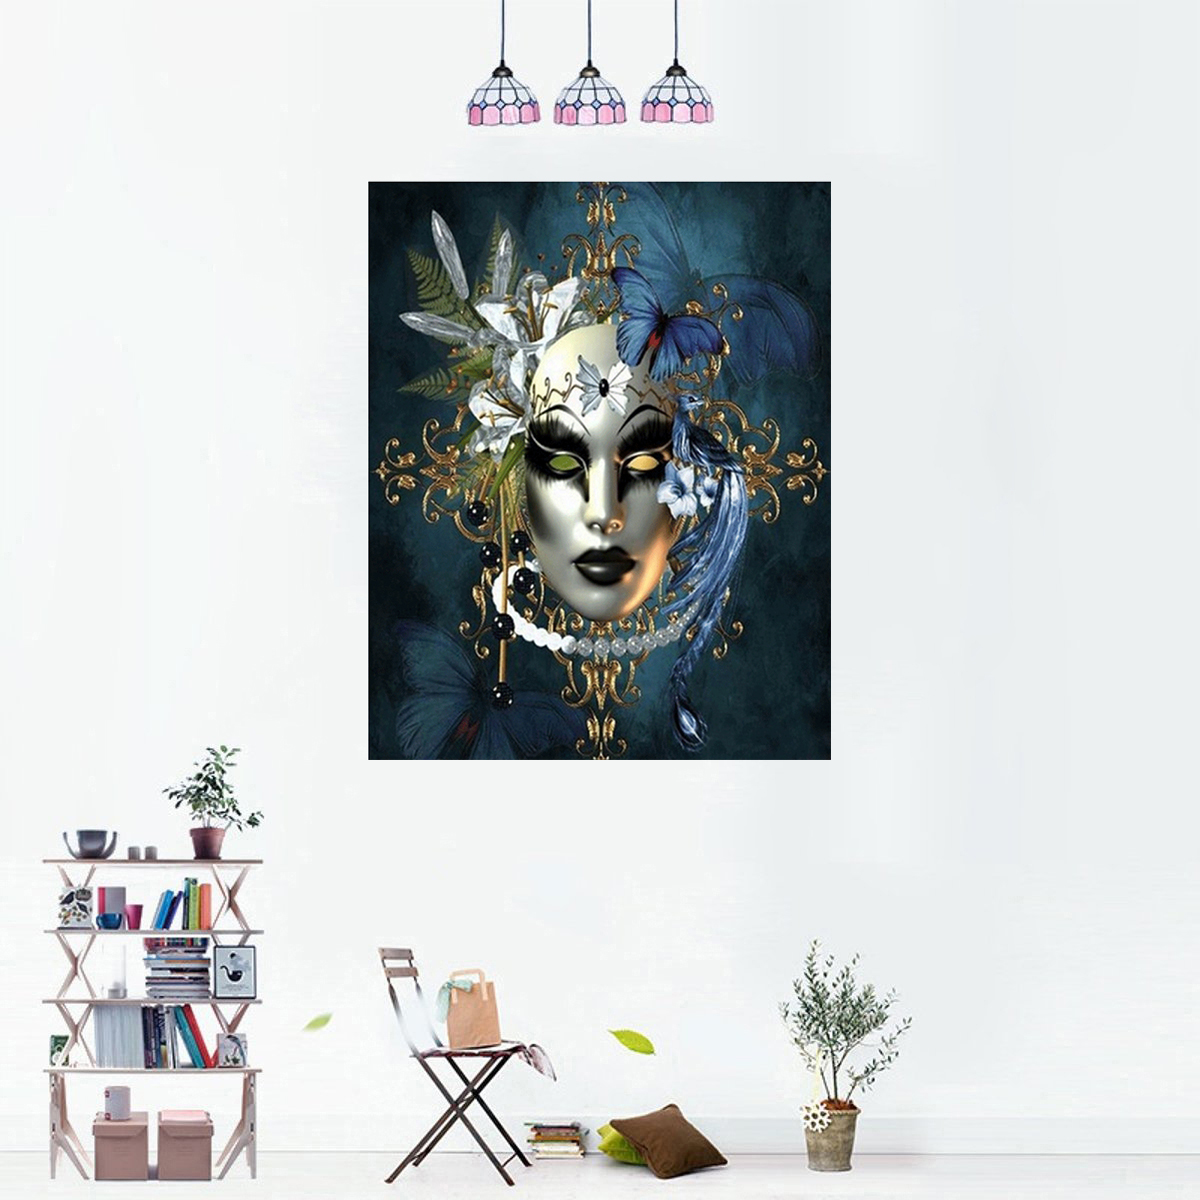 DIY-Diamond-Painted-Mask-5D-Diamond-Wall-Painting-Bedthroom-Home-Hanging-Drawing-Decoration-for-Adul-1744078-7